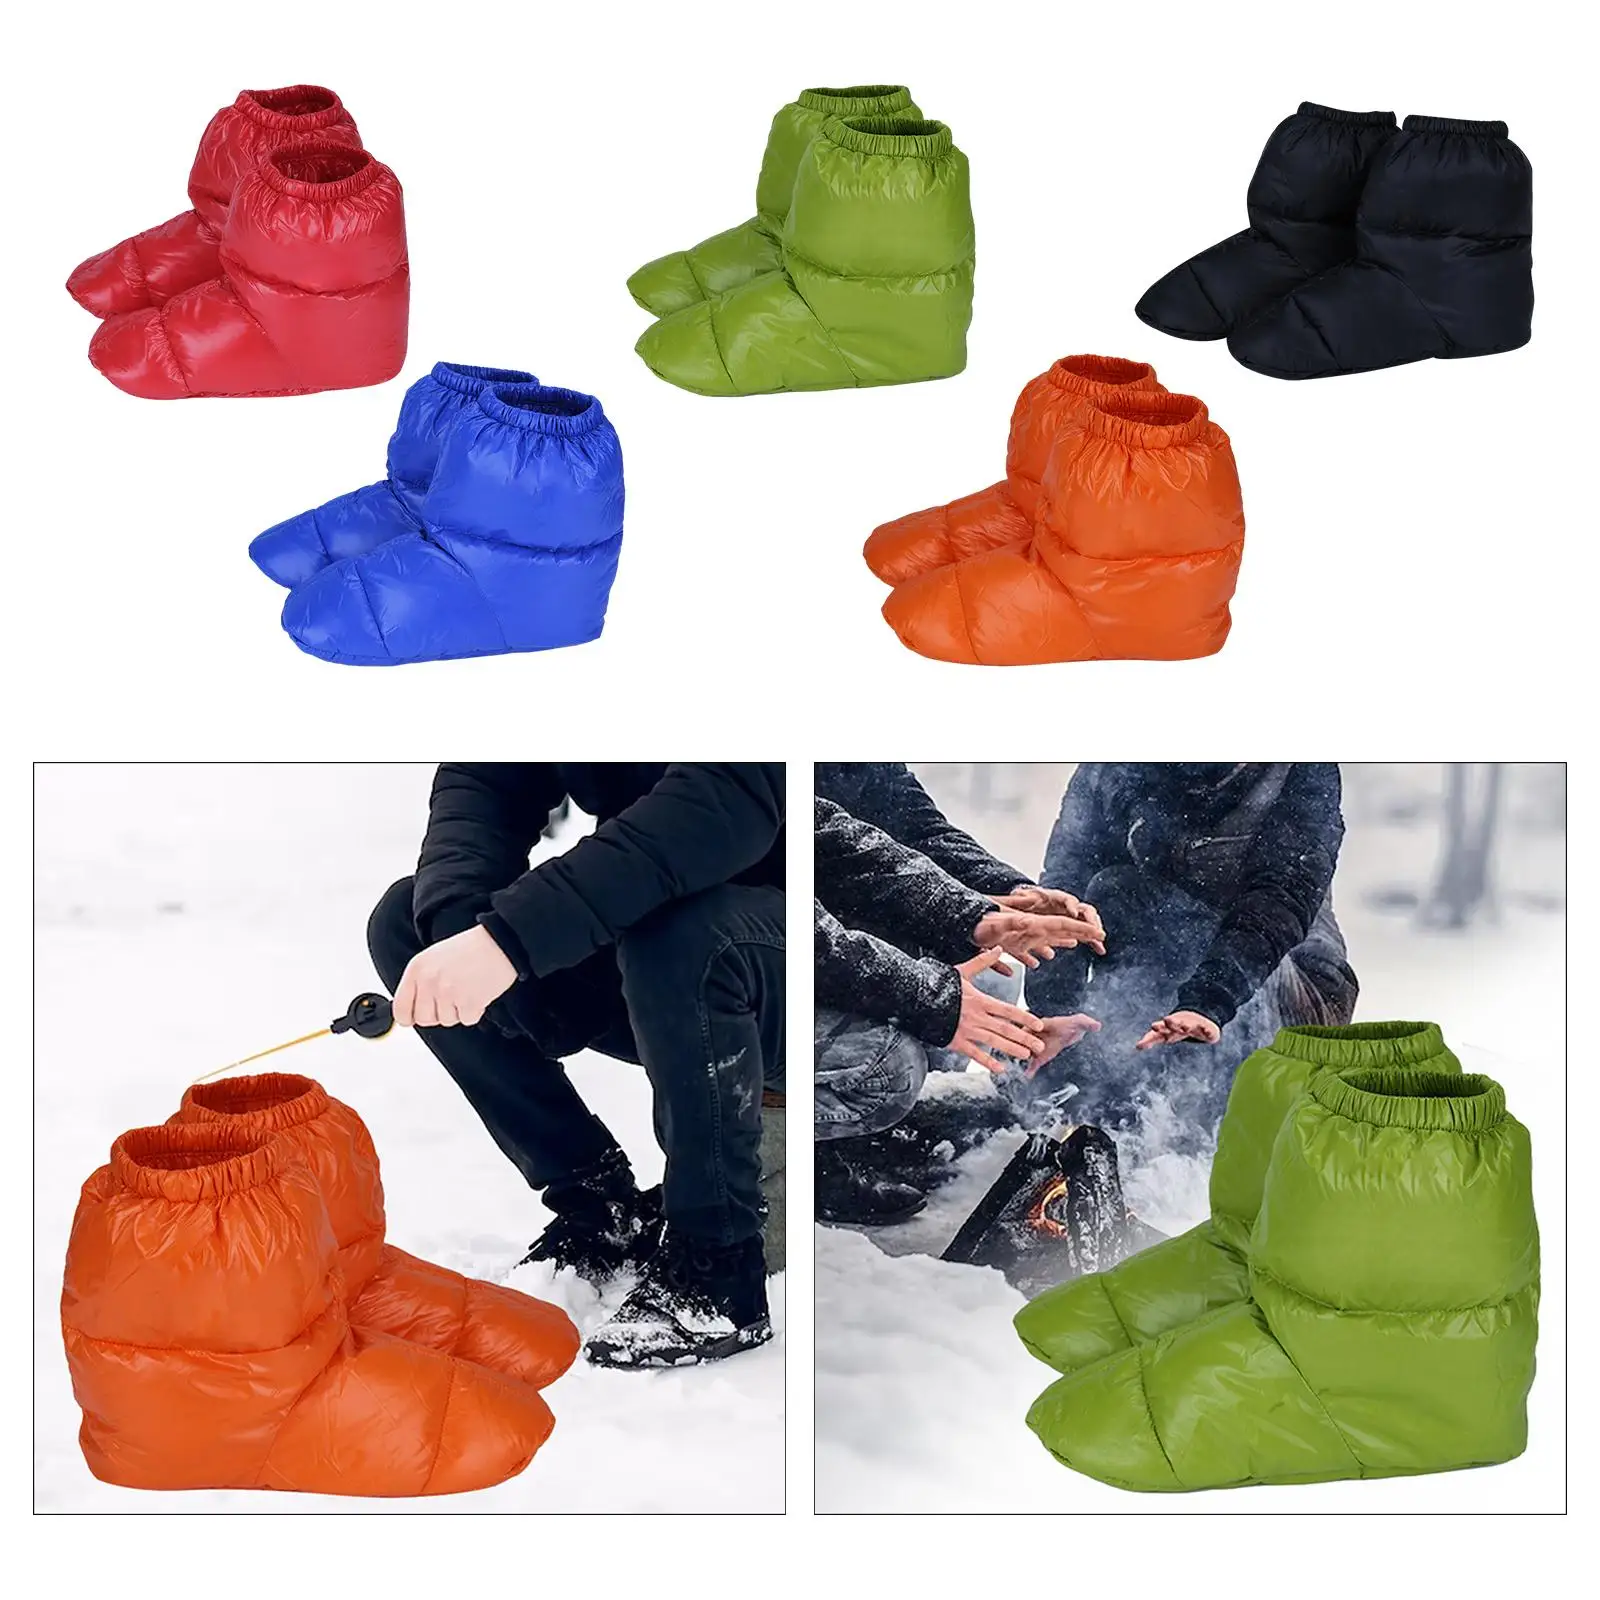 Winter Down Slippers Bootie Shoes Ultralight Comfortable Adults Feet Cover Socks for Skiing Hiking Outdoor Backpacking Indoor